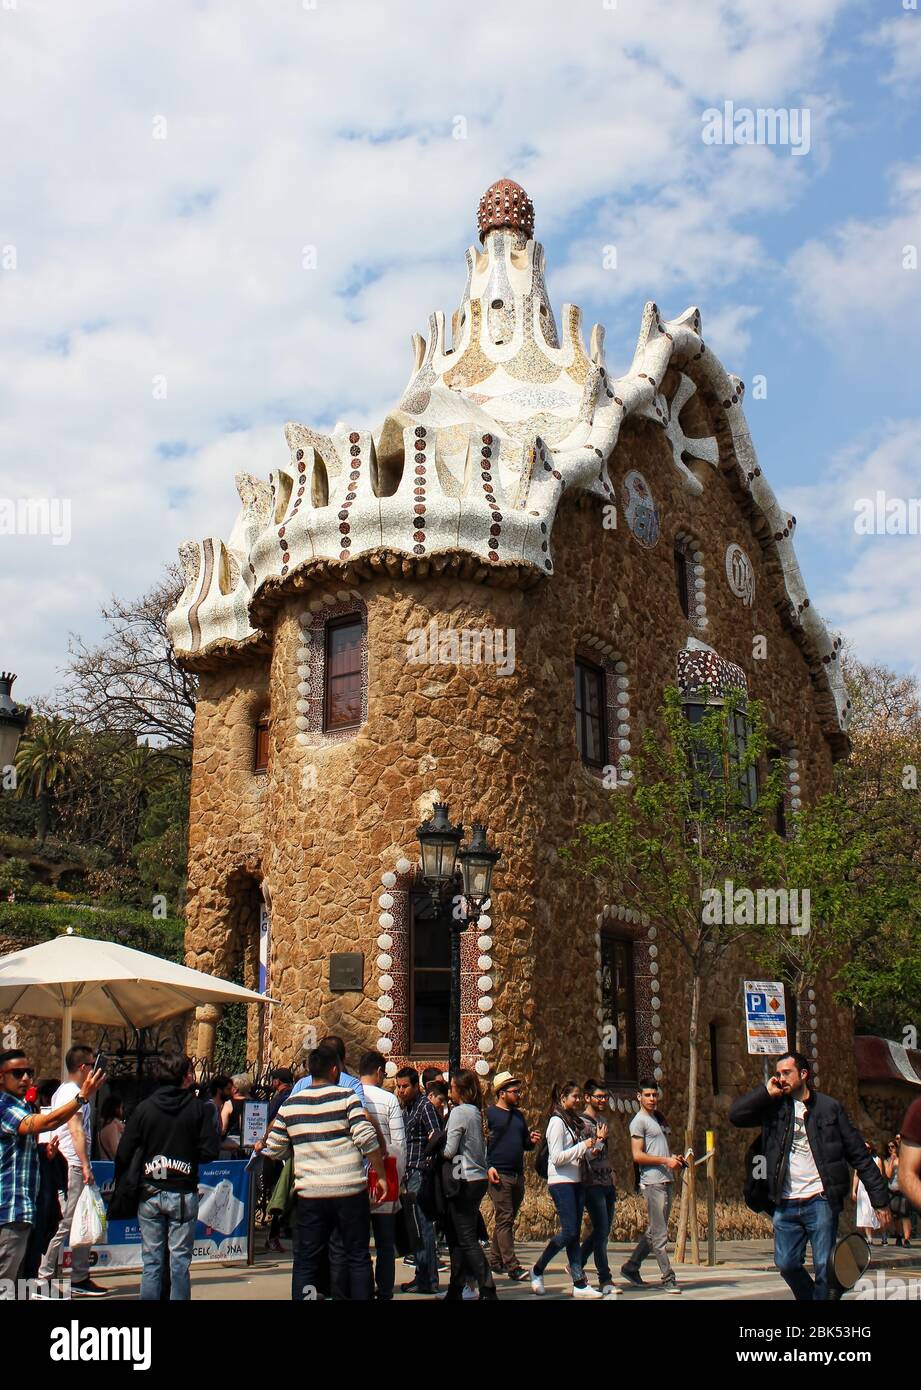 Architectural building with tourists in the Park Güell, located on Carmel Hill in Barcelona, Catalonia, Spain. Architect Antoni Gaudi. Stock Photo